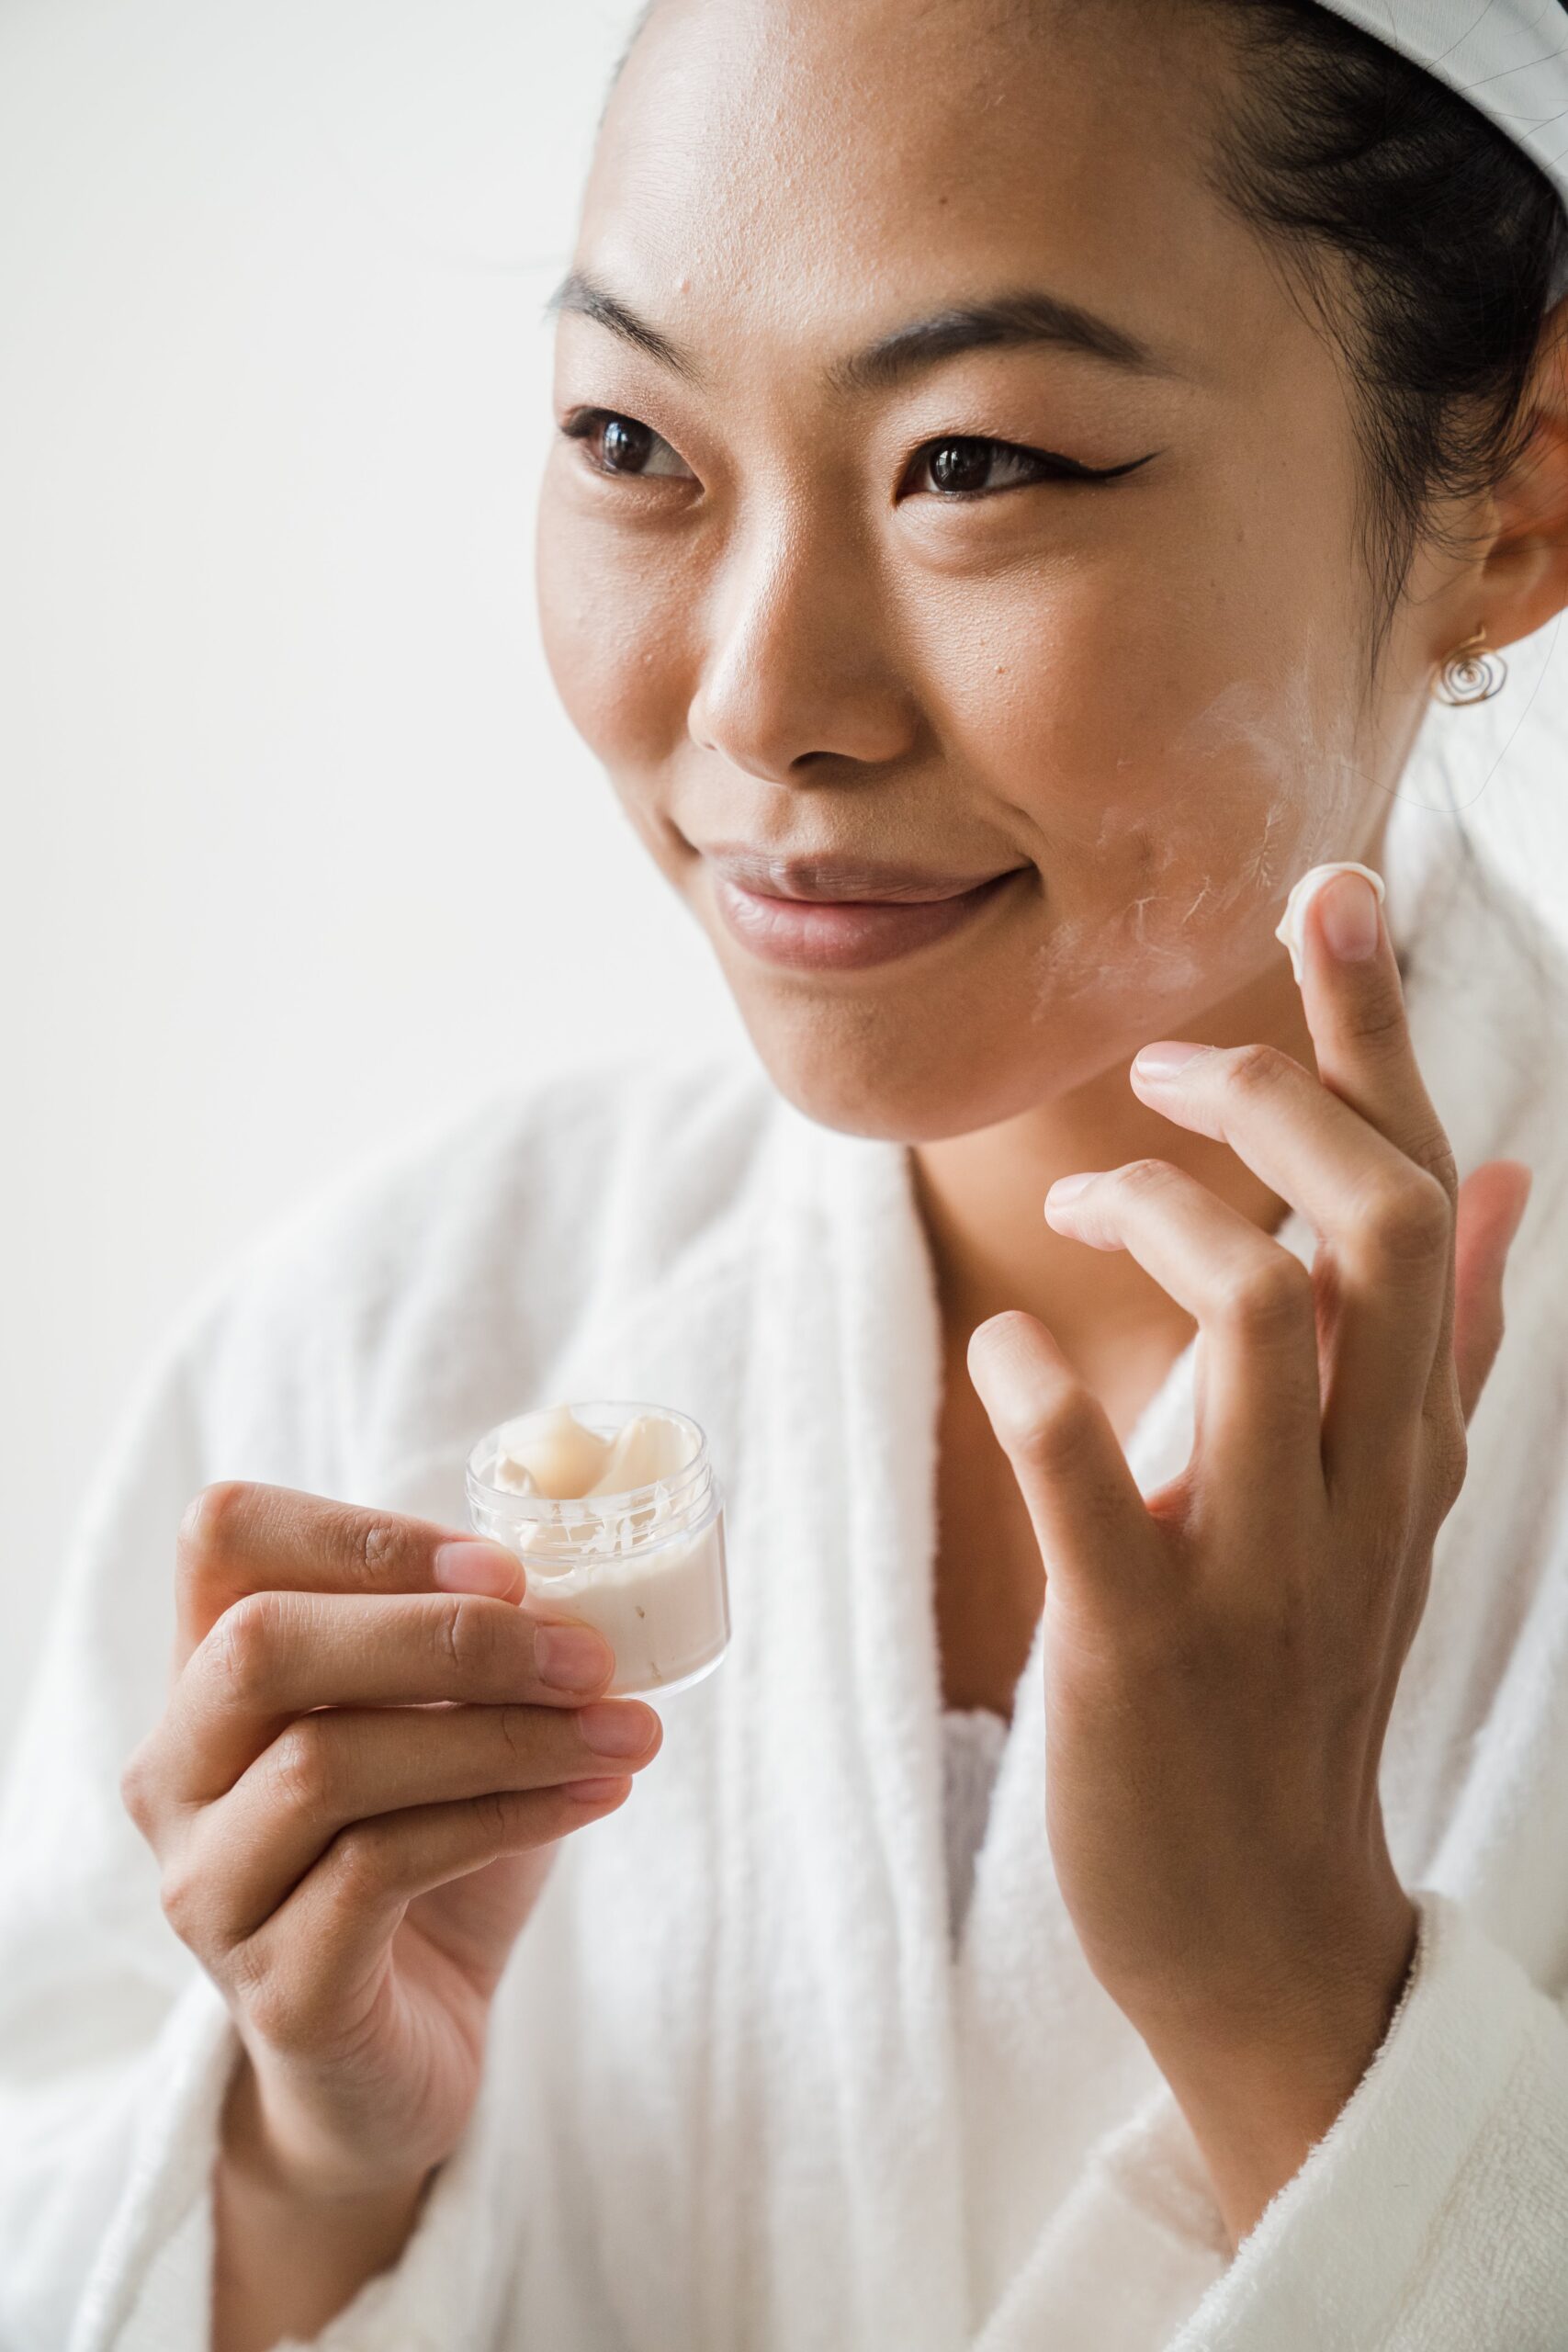 How to moisturize and revitalize dry, winter skin. Here is an image of a young Asian woman applying moisturizer cream to her face.